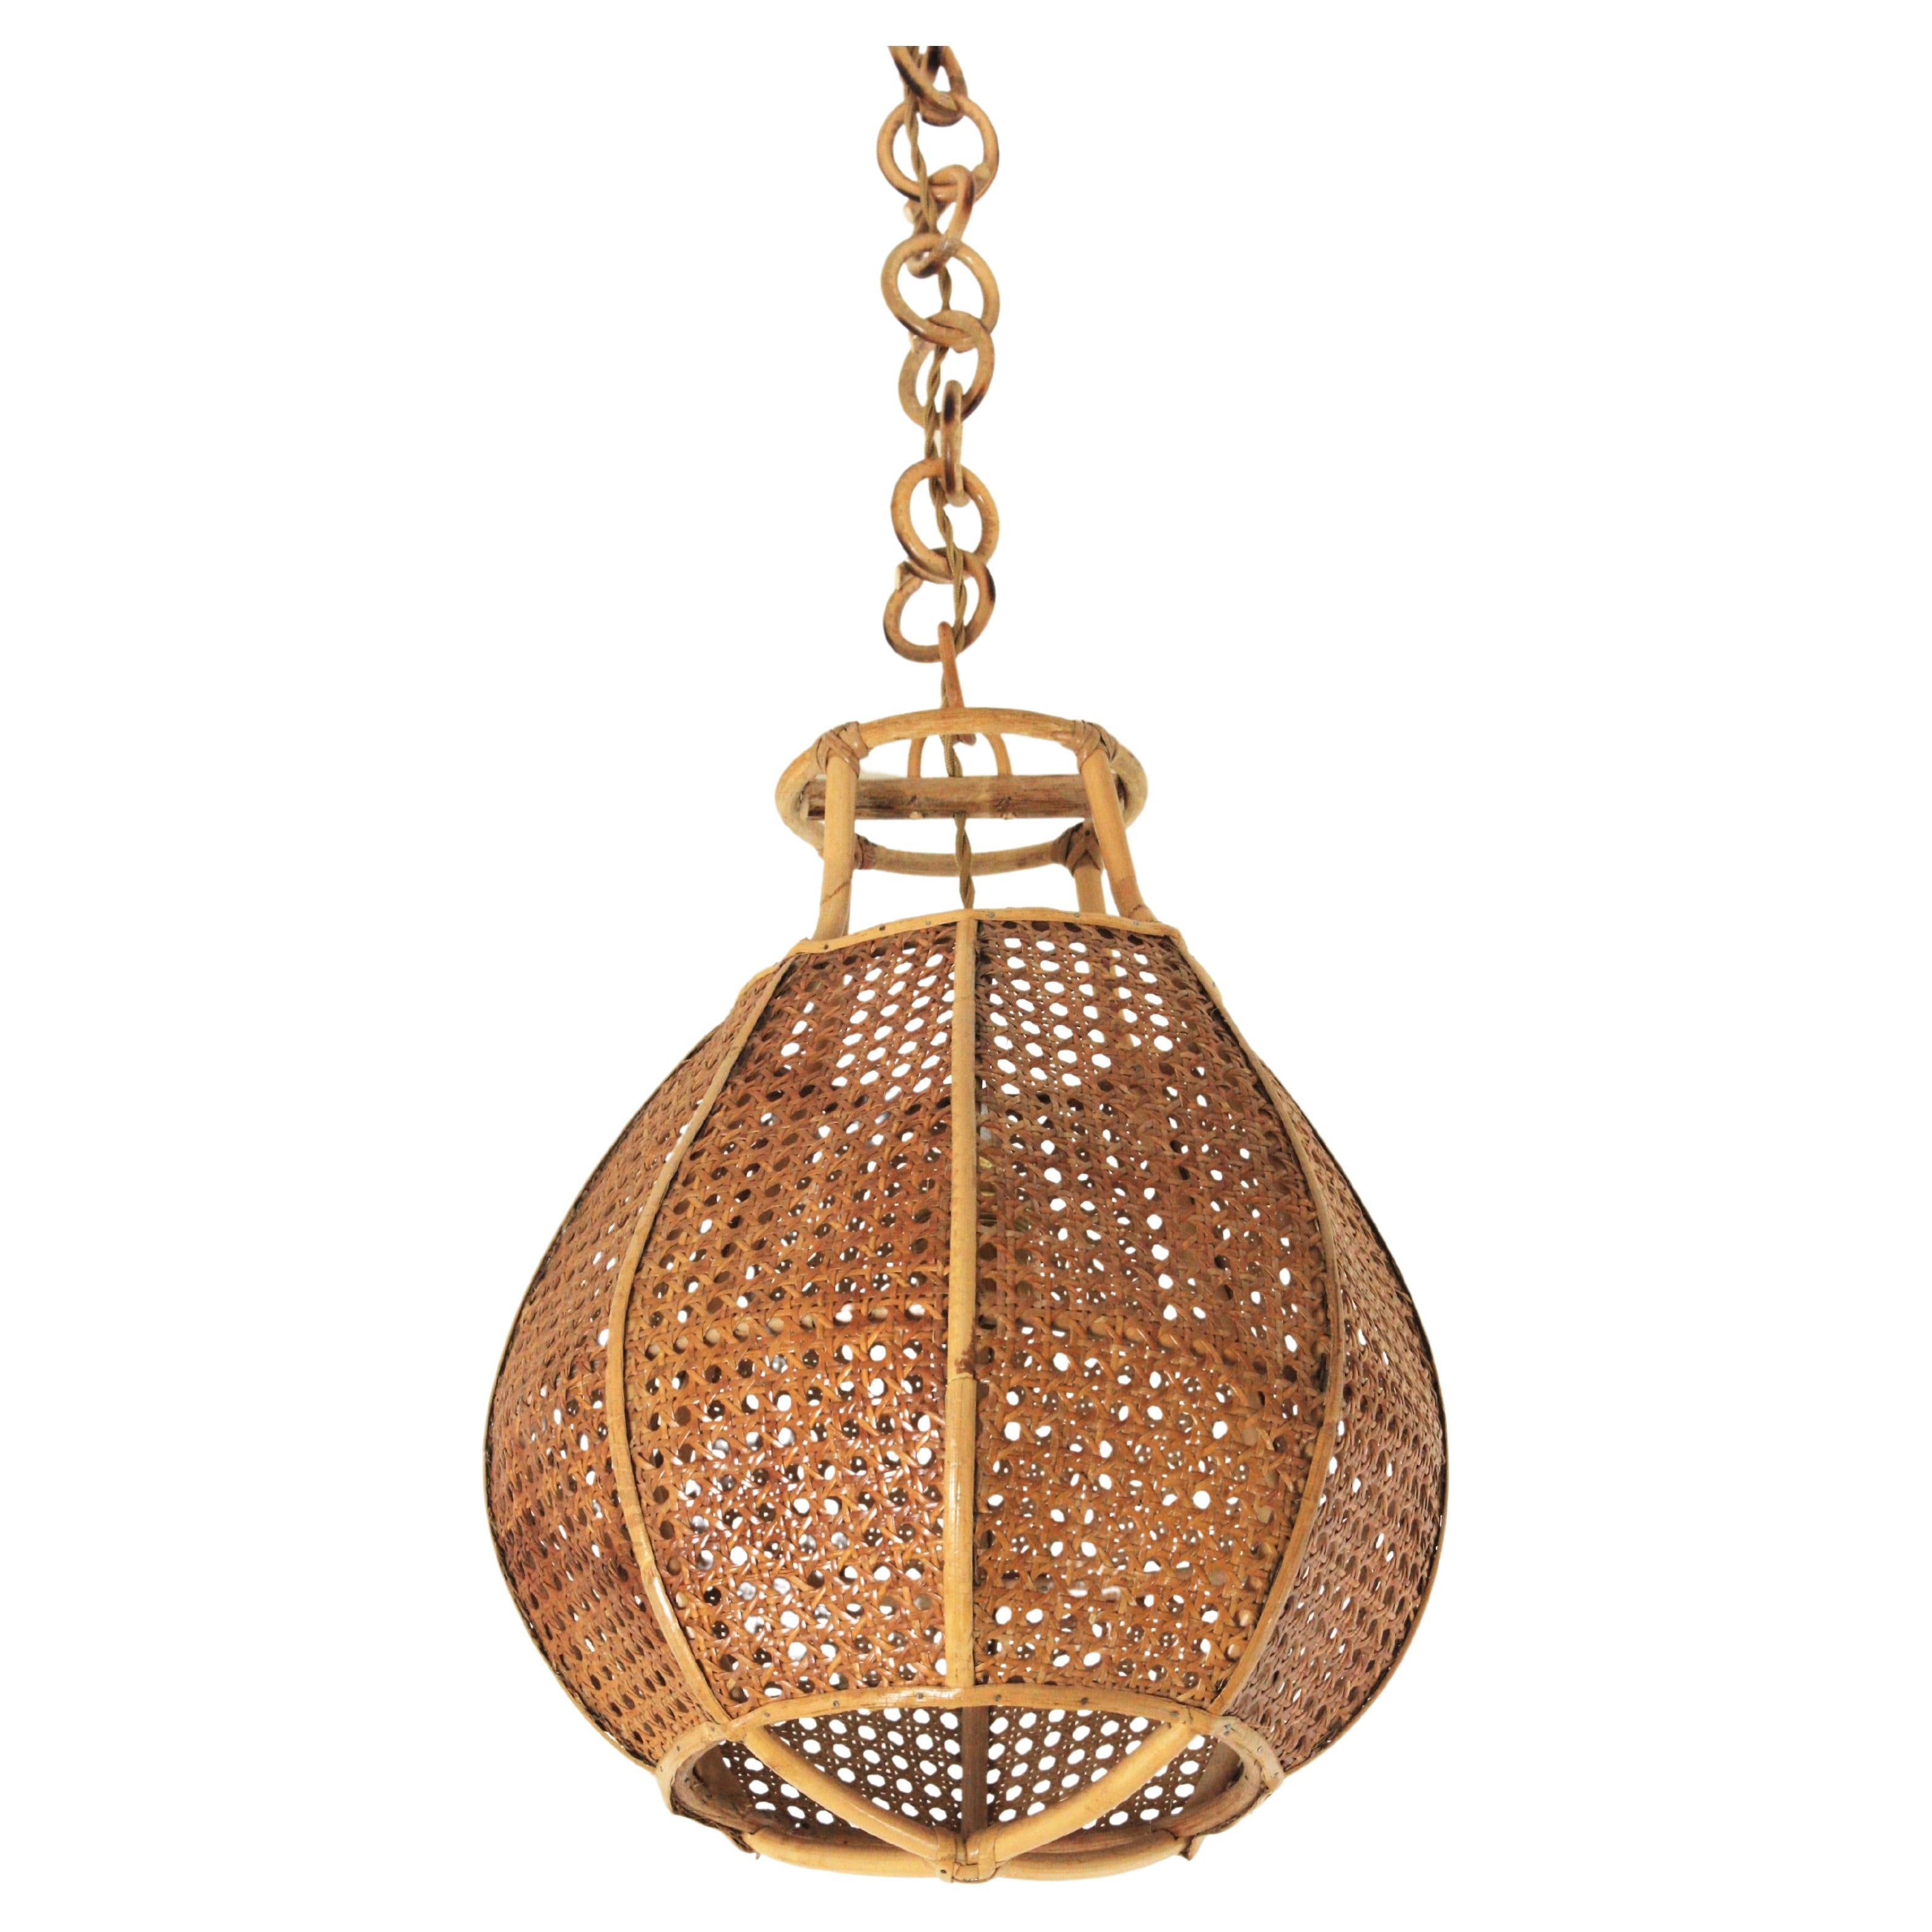 Mid-Century Modern woven wicker and rattan globe shaped lantern or pendant ceiling lamp. Italy, 1950s-1960s.
The woven wicker spherical shade of this lamp is accented by rattan details. It hangs from a chain with round rattan links that can be cut